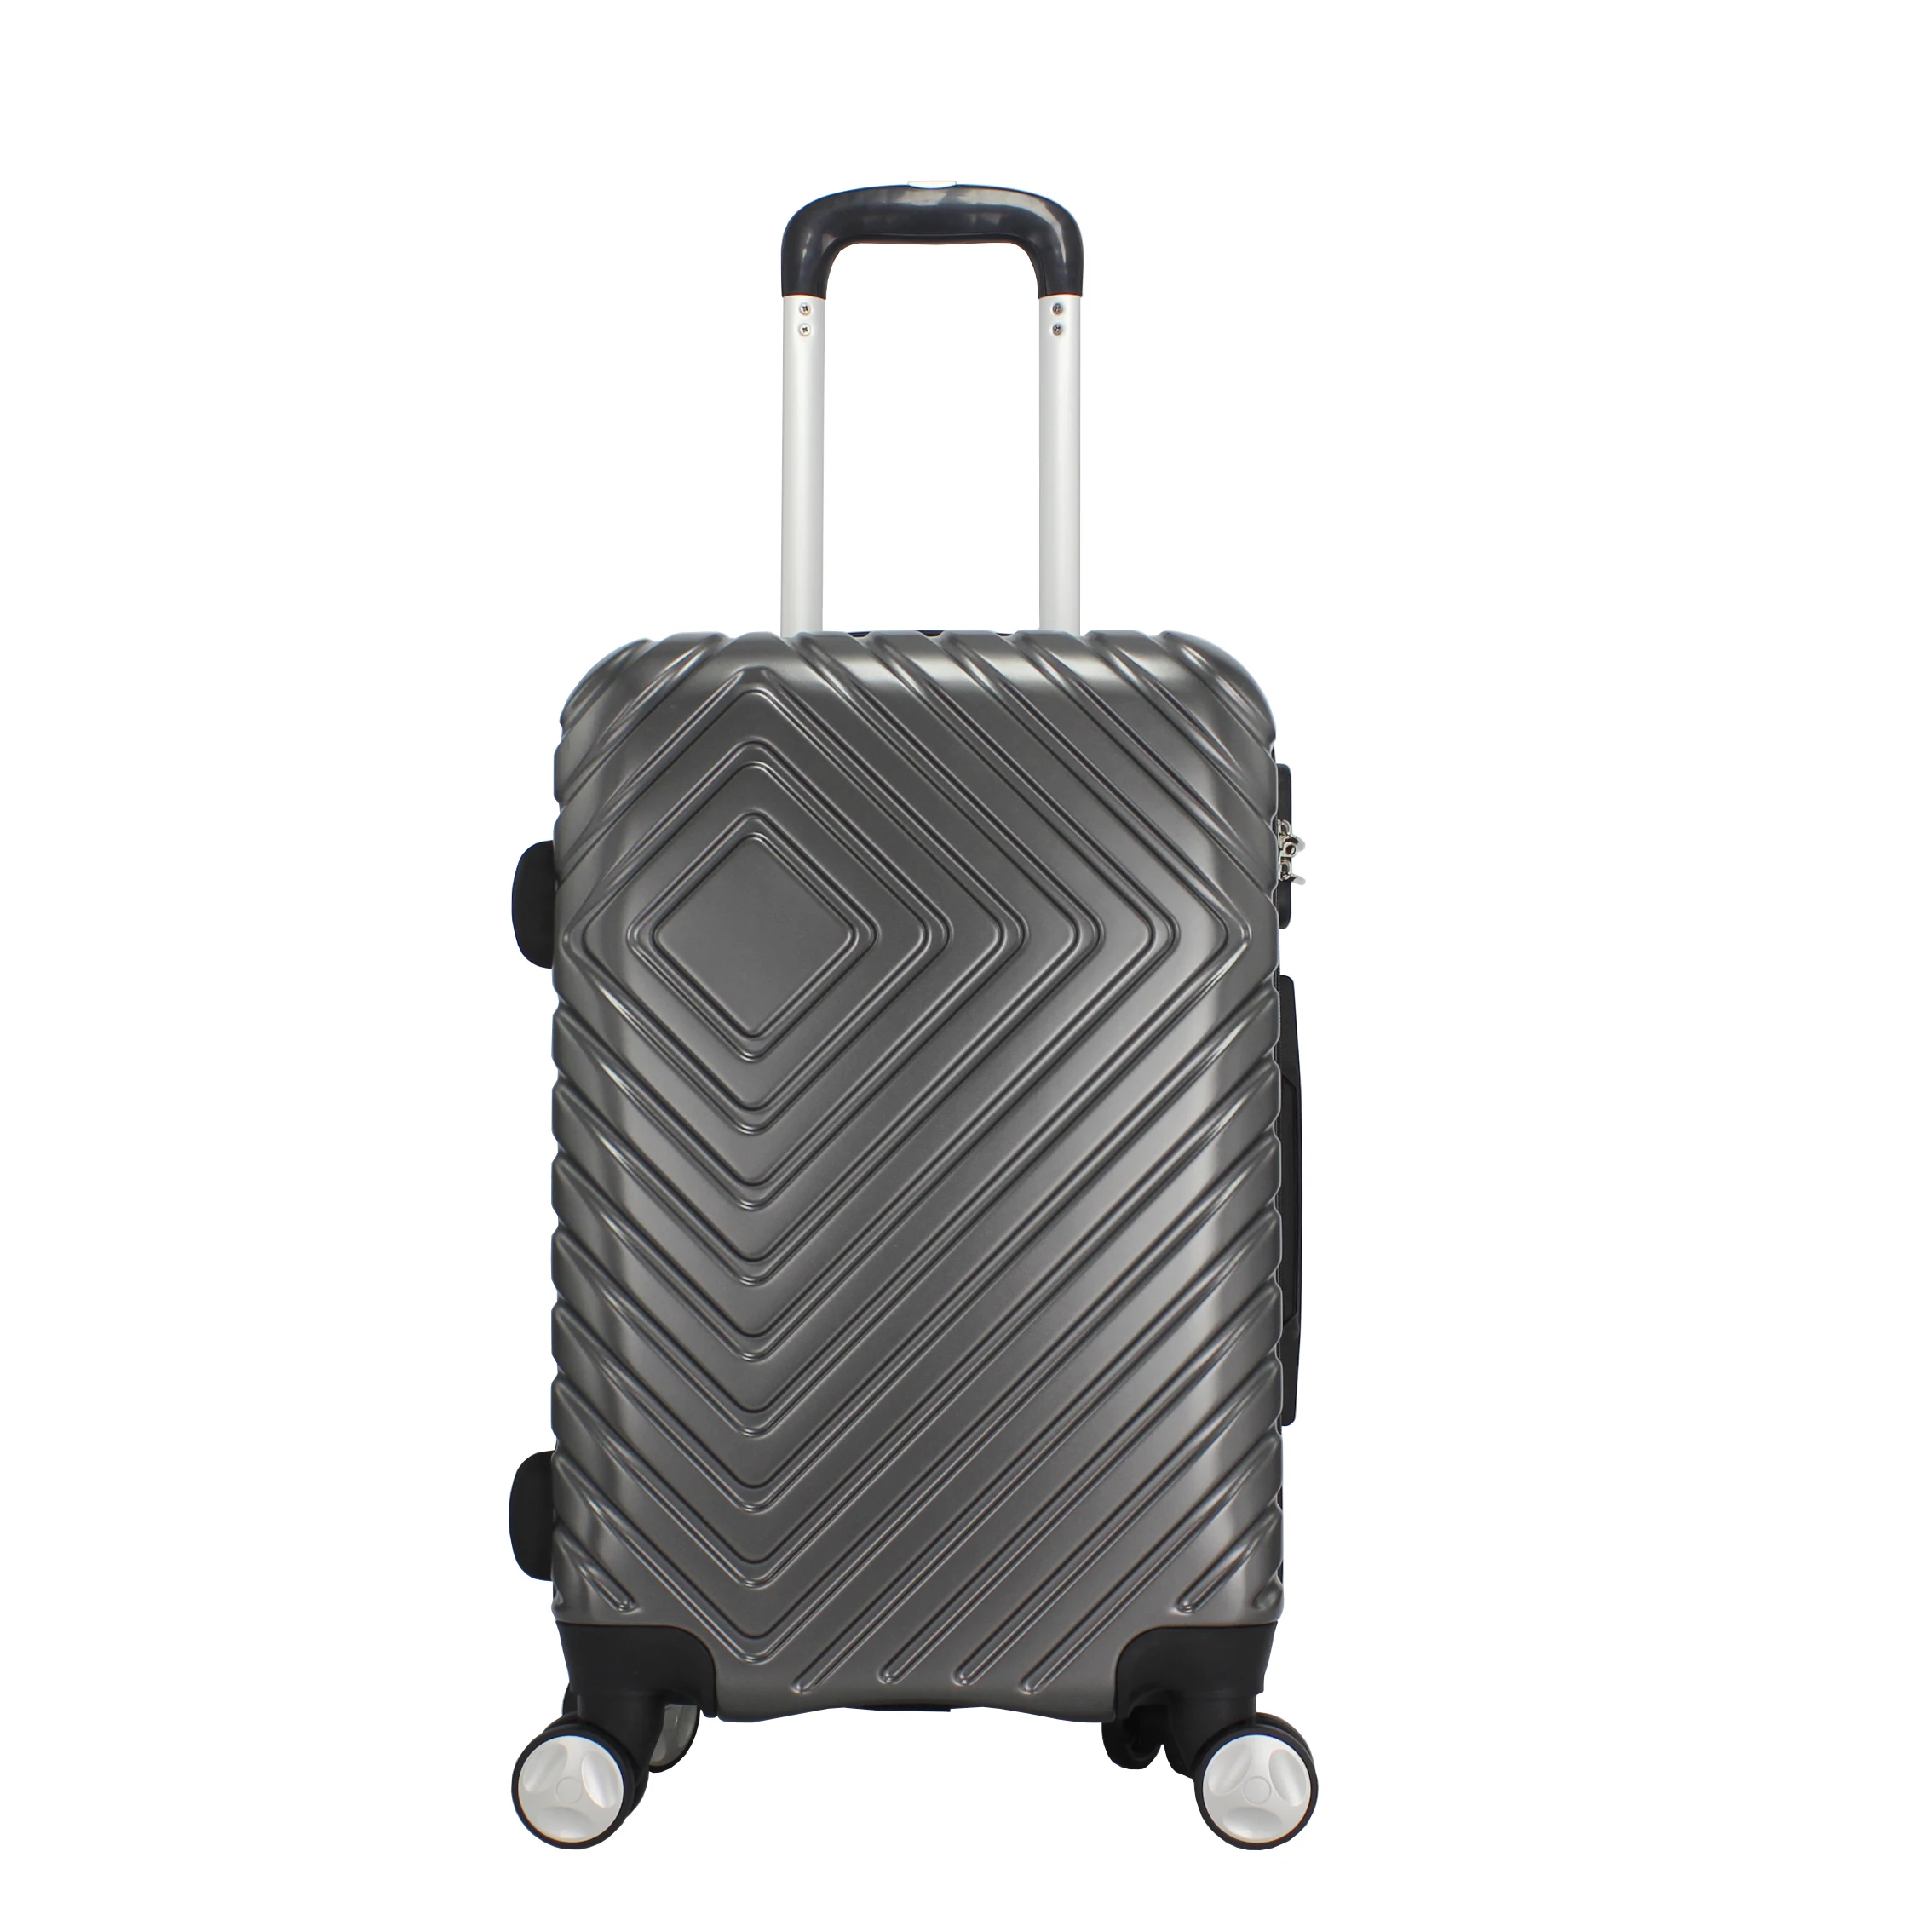 NEW CABIN TRAVEL BAG WHEELED LIGHTWEIGHT HOLDALL SUITCASE HAND LUGGAGE TROLLEY